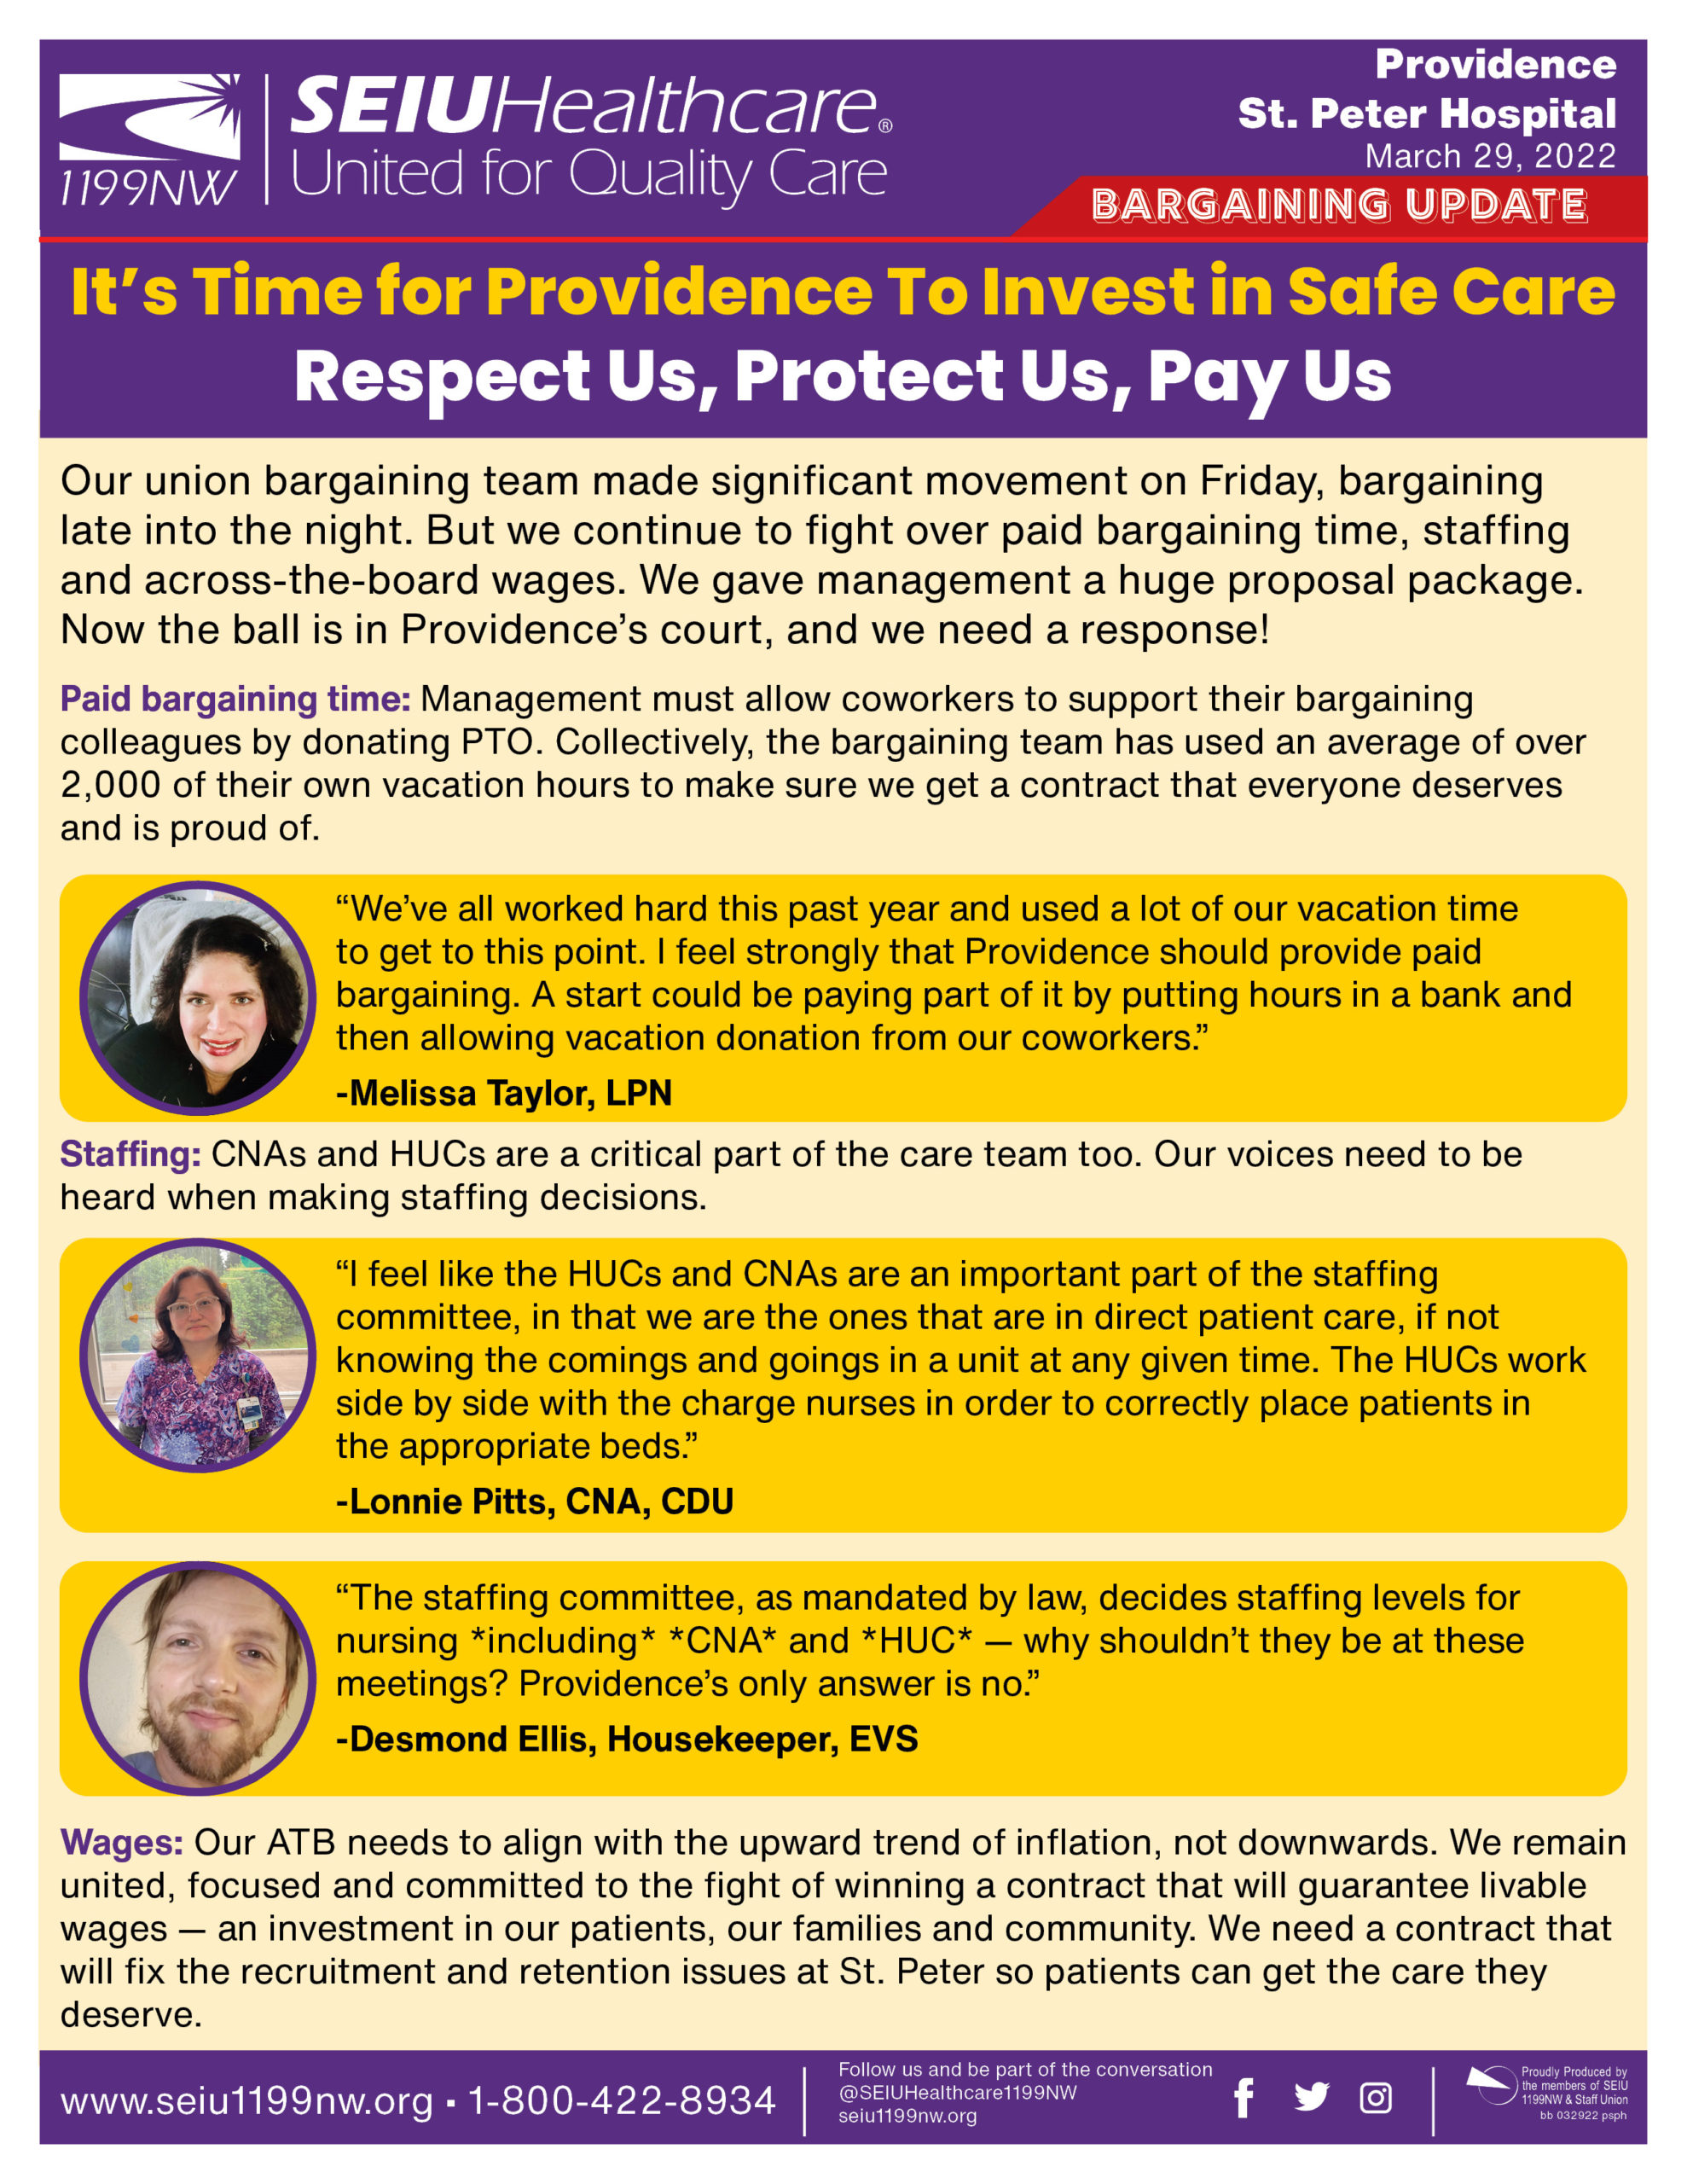 It’s Time for Providence To Invest in Safe Care. Respect Us, Protect Us, Pay Us